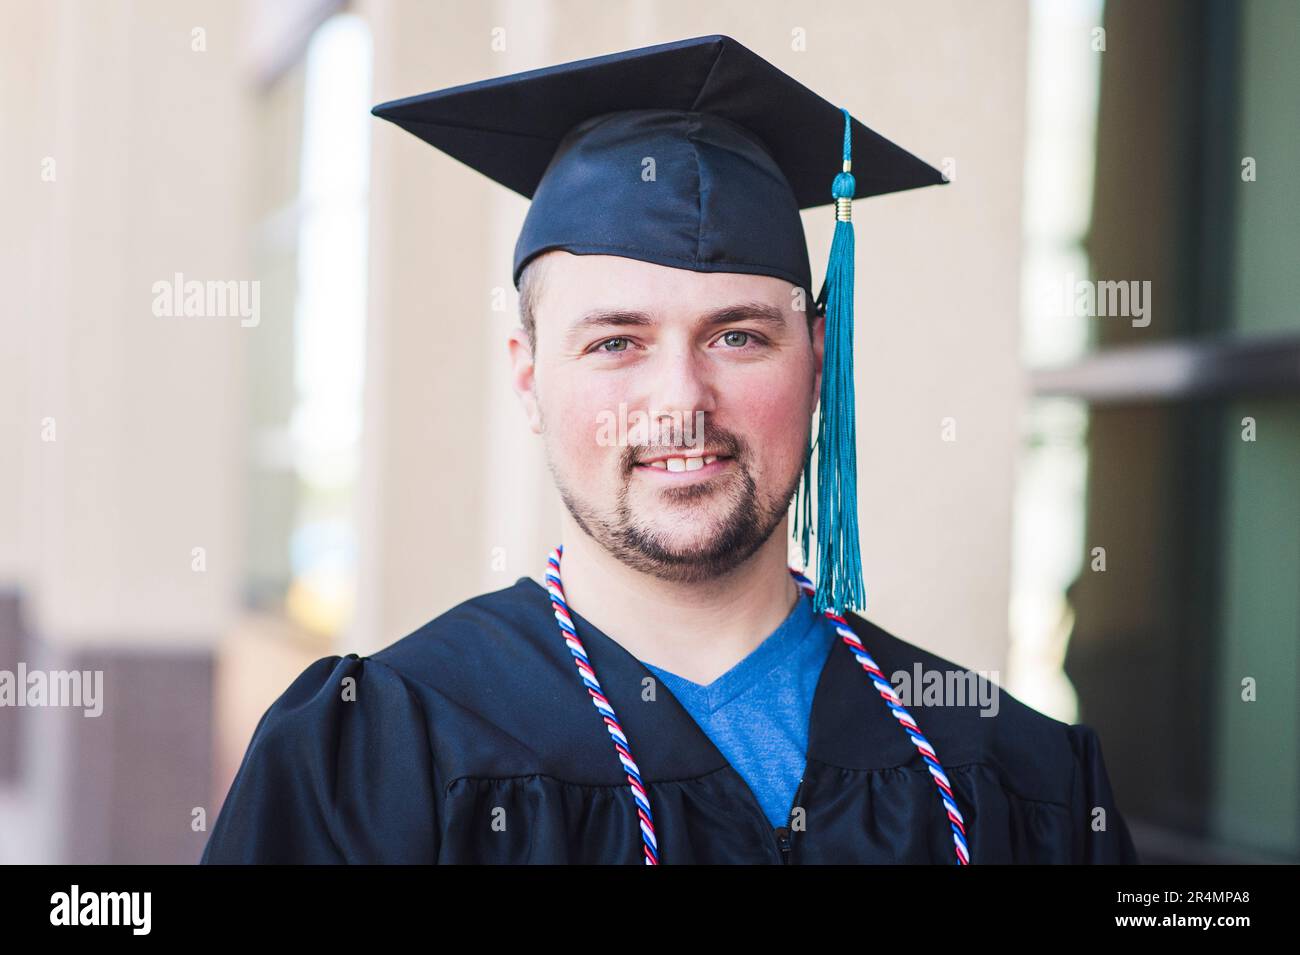 Smiling portrait of male graduate in black cap and gown Stock Photo